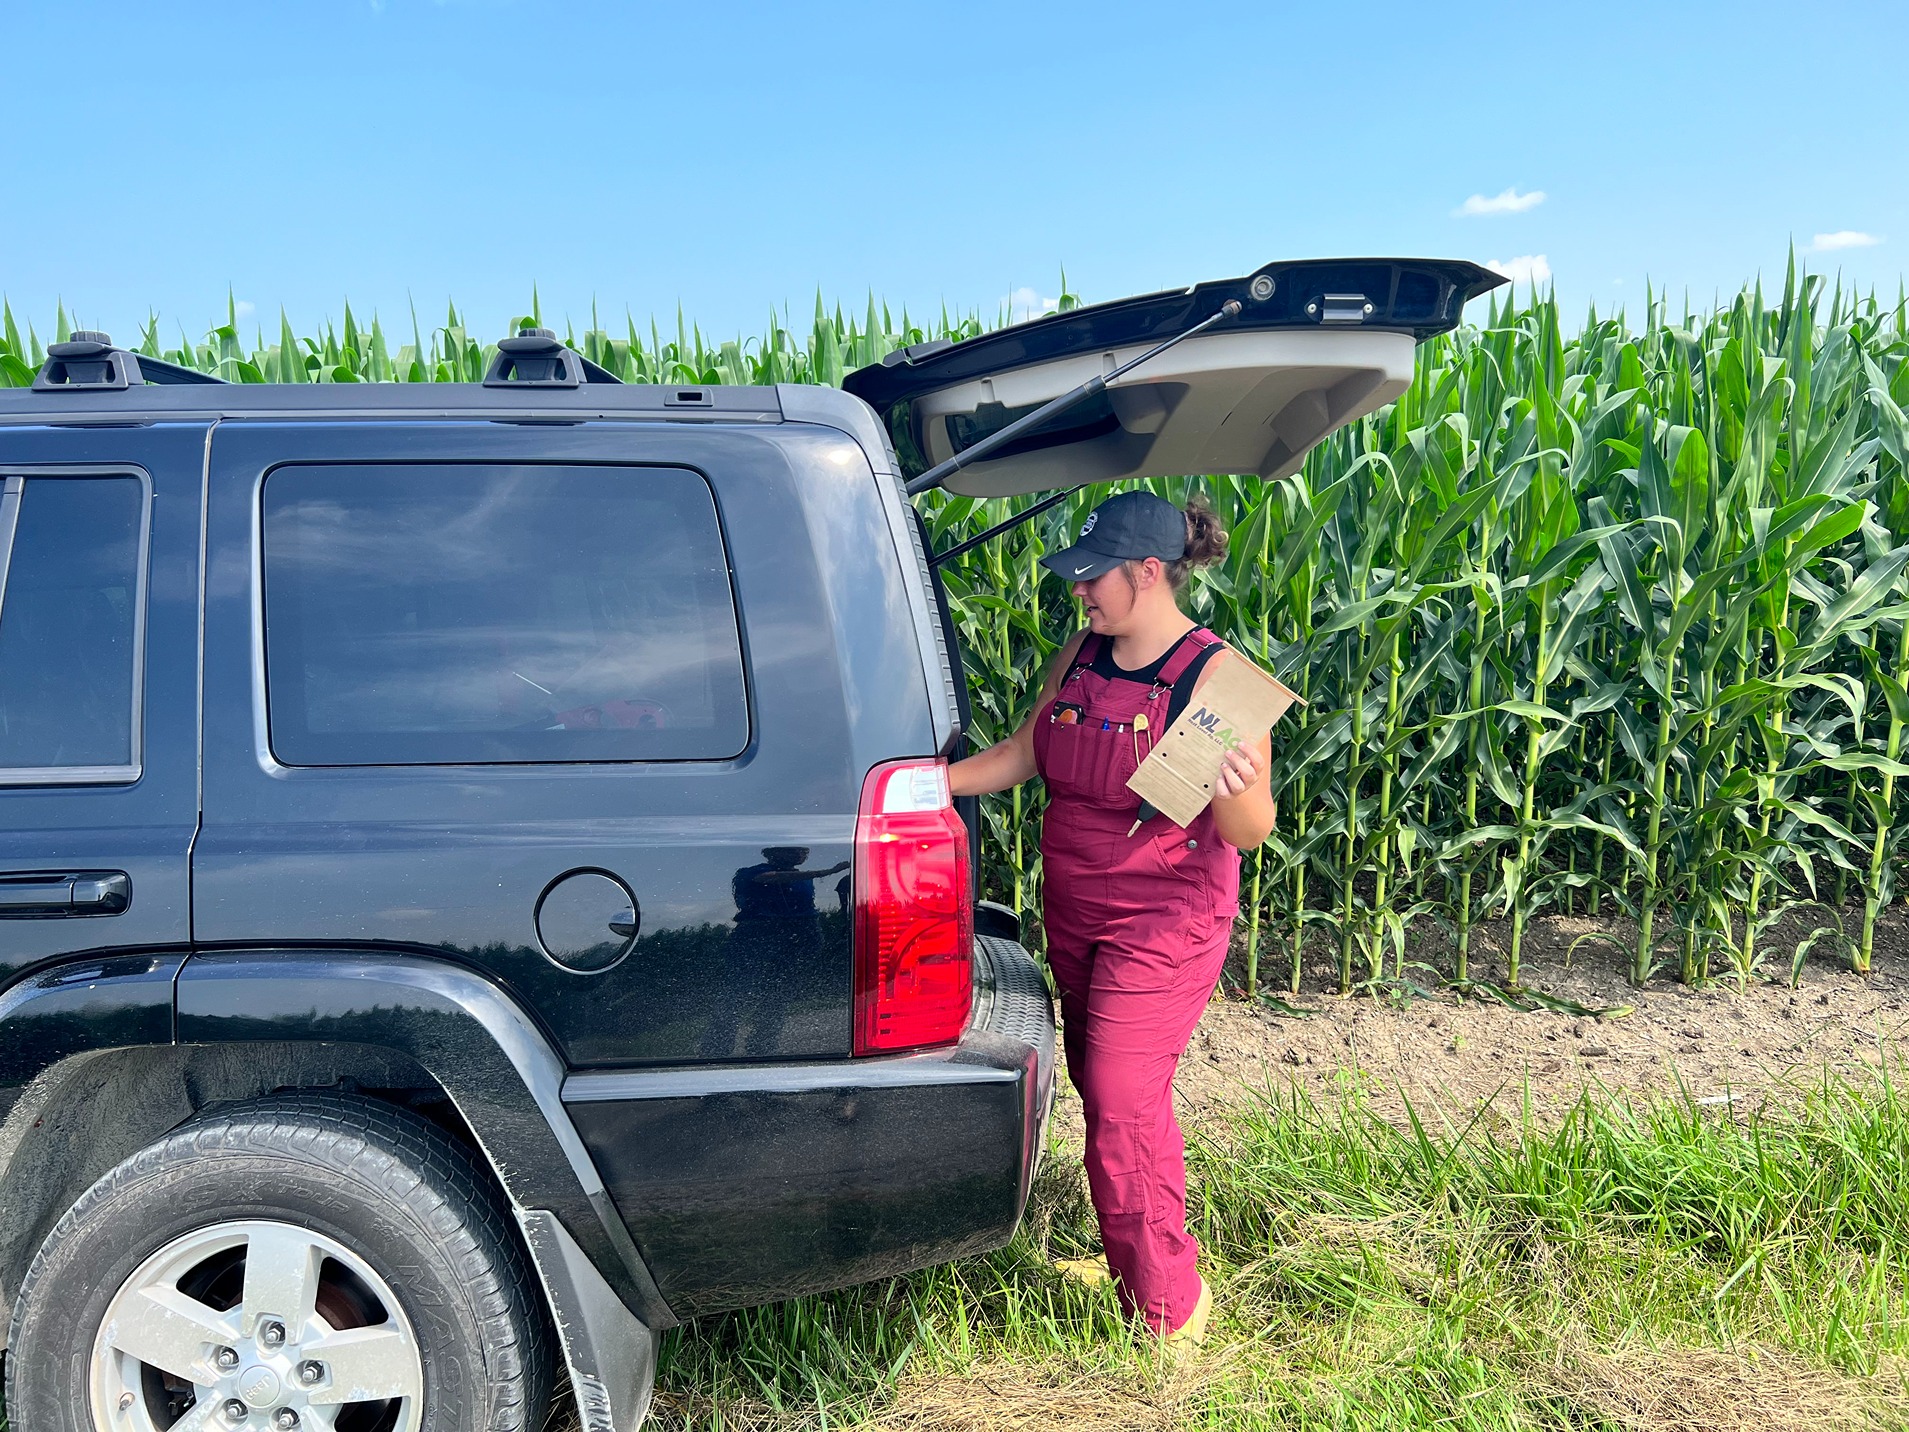 Madelyn Pierce gathers soil and tissue sampling supplies (a paper sample bag) from the trunk of her car to gauge the corn field's health